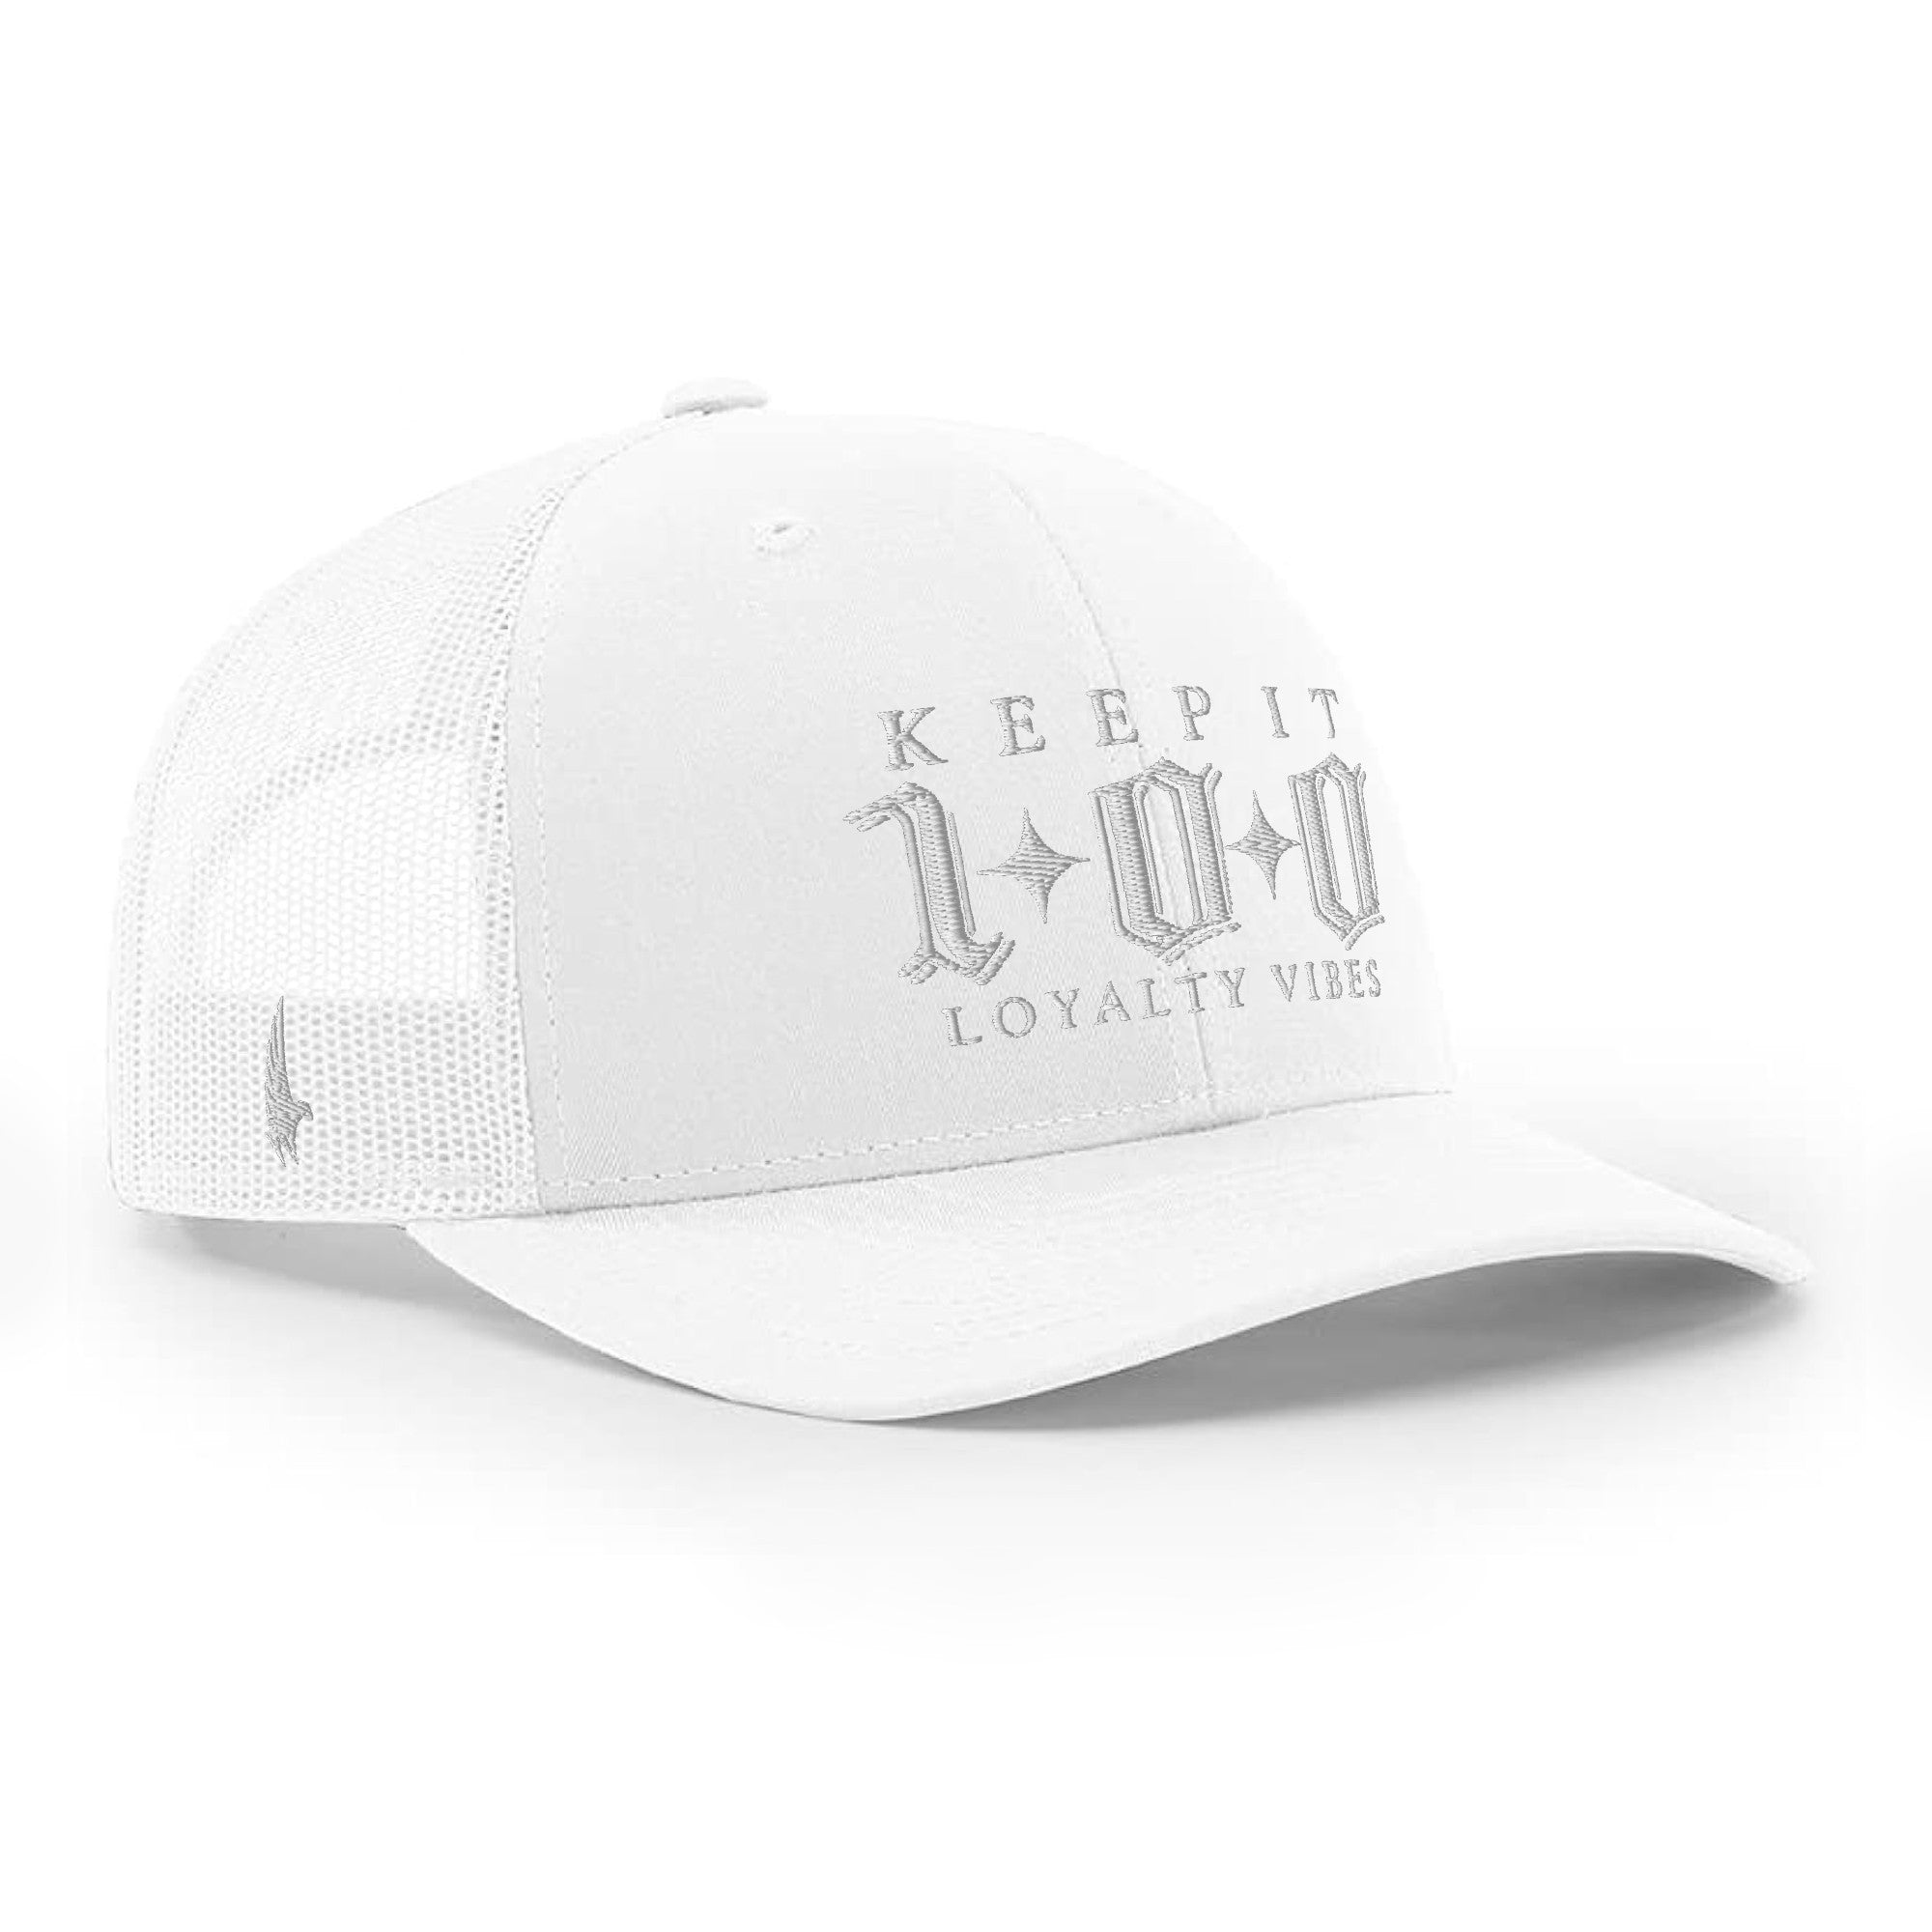 Keep It 100 Trucker Hat White Out OS - Loyalty Vibes